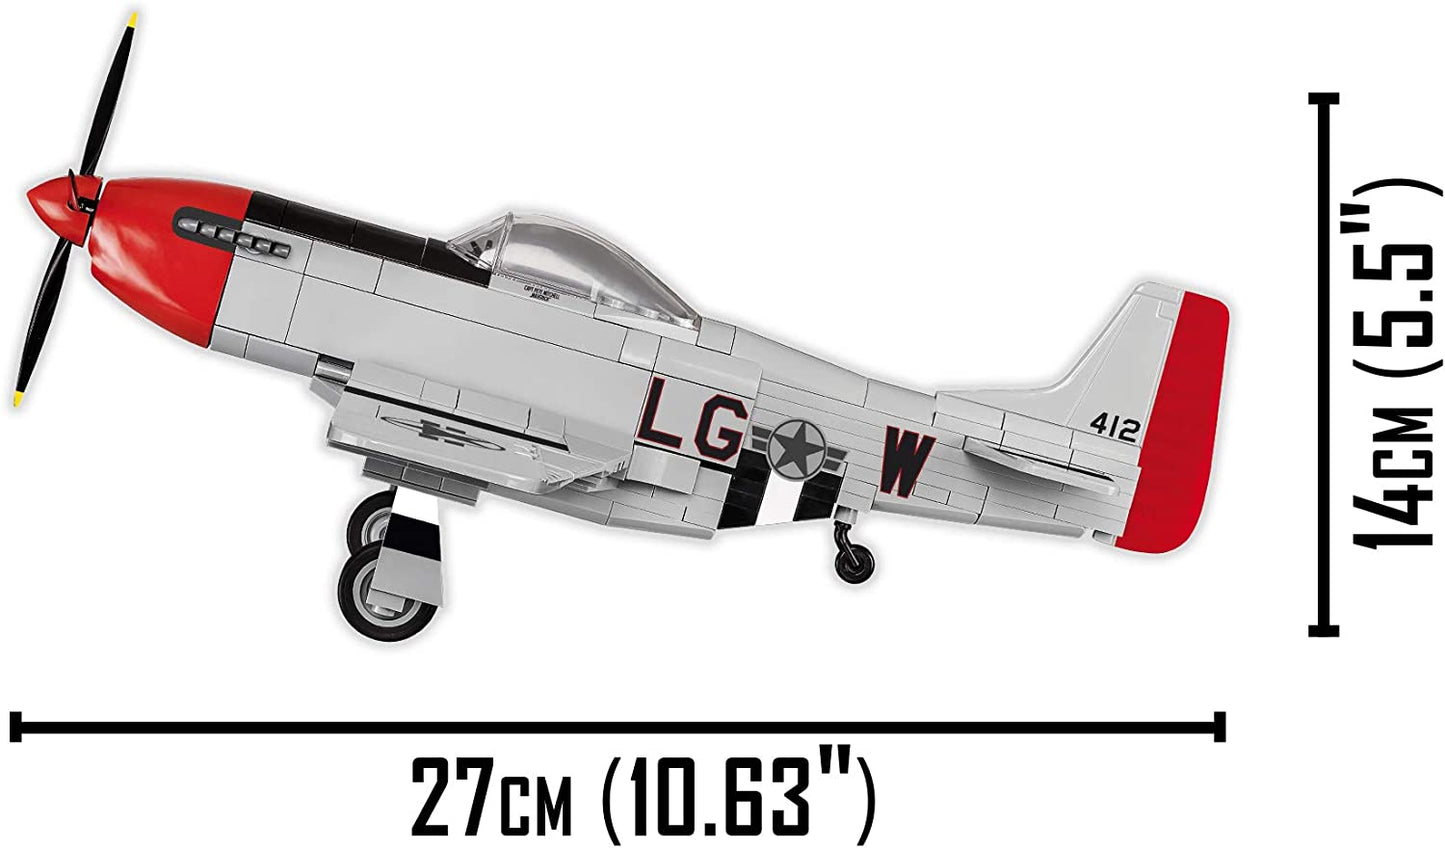 Size measurements for a model miniature version of a Mustang P-51D airplane. It measures 27cm across and 14 cm in height.